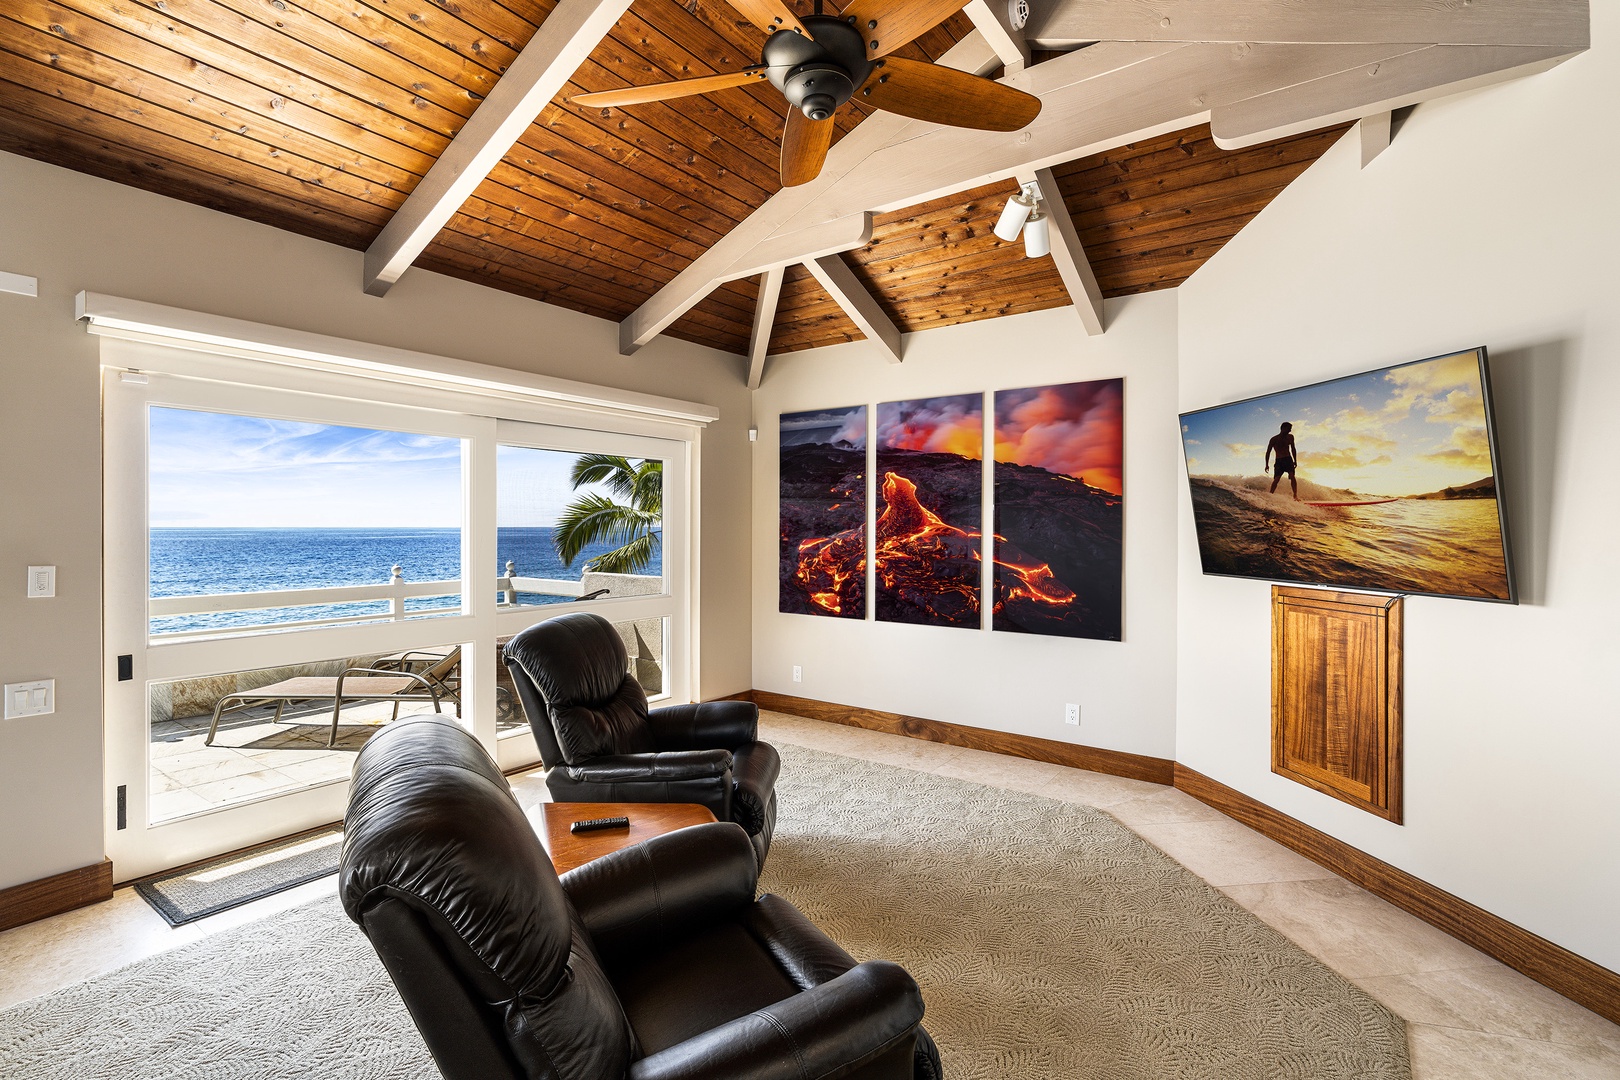 Kailua Kona Vacation Rentals, Ali'i Point #9 - Viewing area in the Primary bedroom features a 55in smart TV